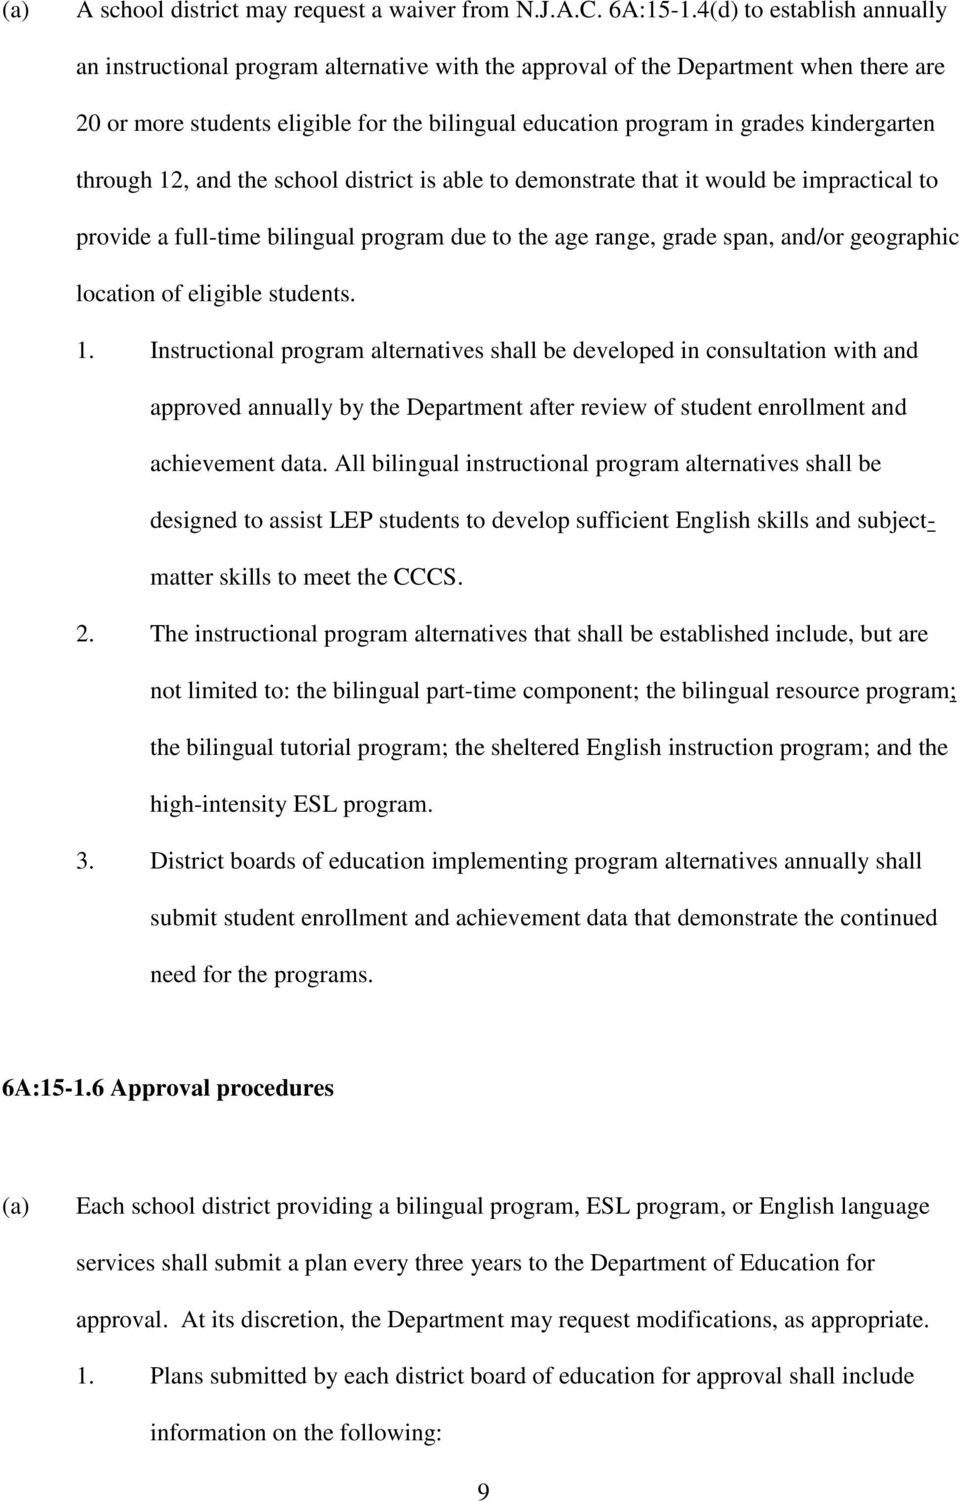 kindergarten through 12, and the school district is able to demonstrate that it would be impractical to provide a full-time bilingual program due to the age range, grade span, and/or geographic